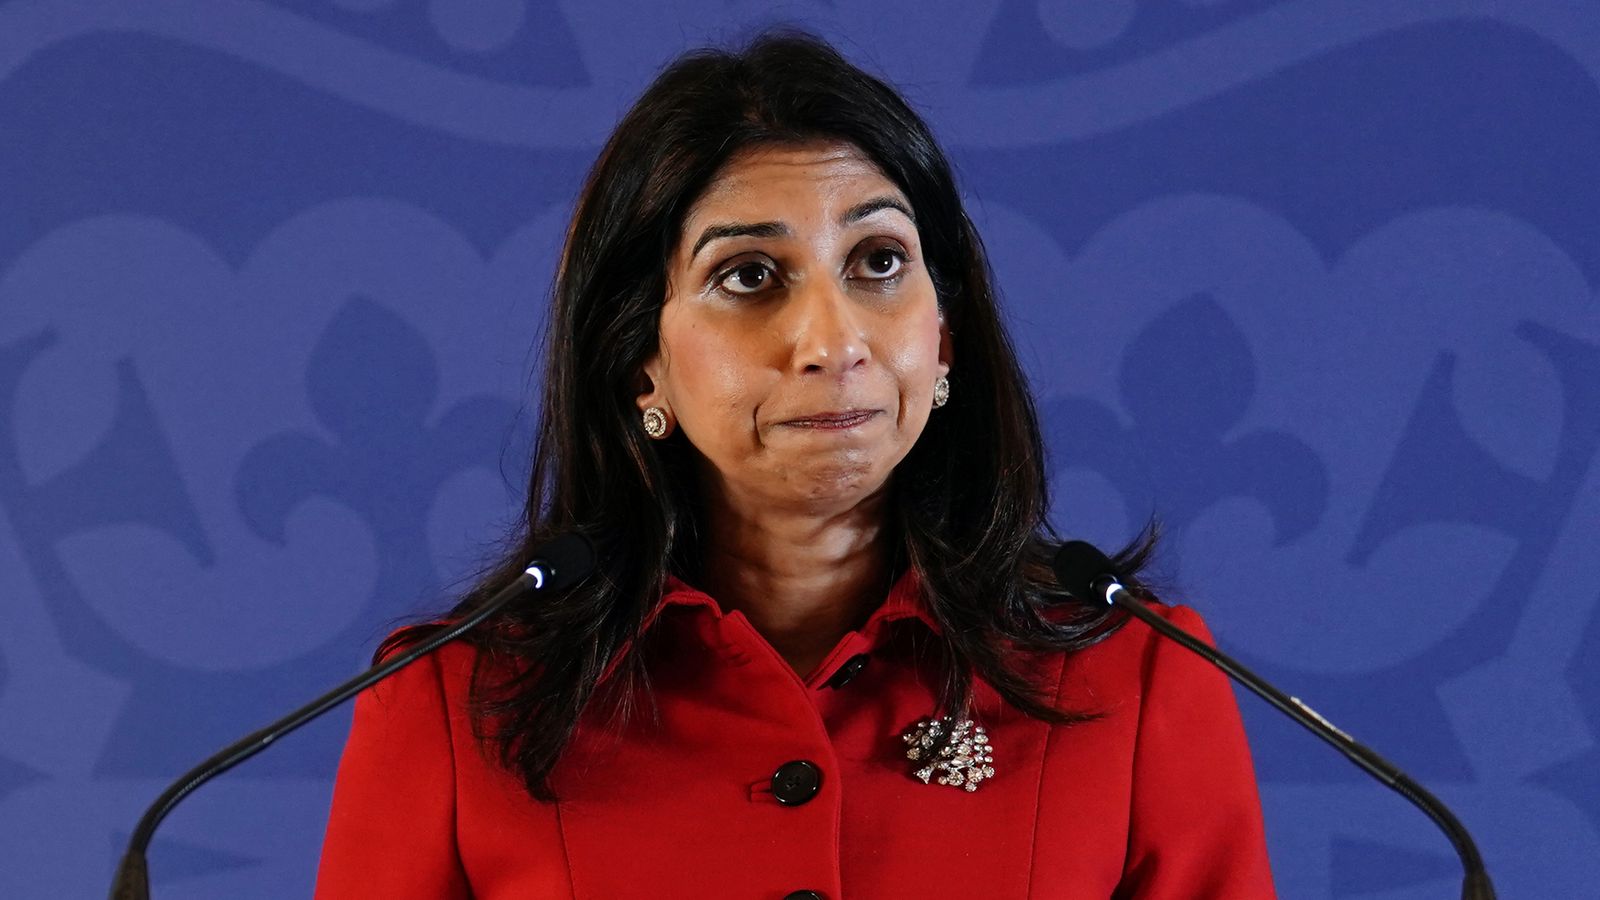 Home Secretary Suella Braverman questions whether international migration rules are 'fit for purpose'